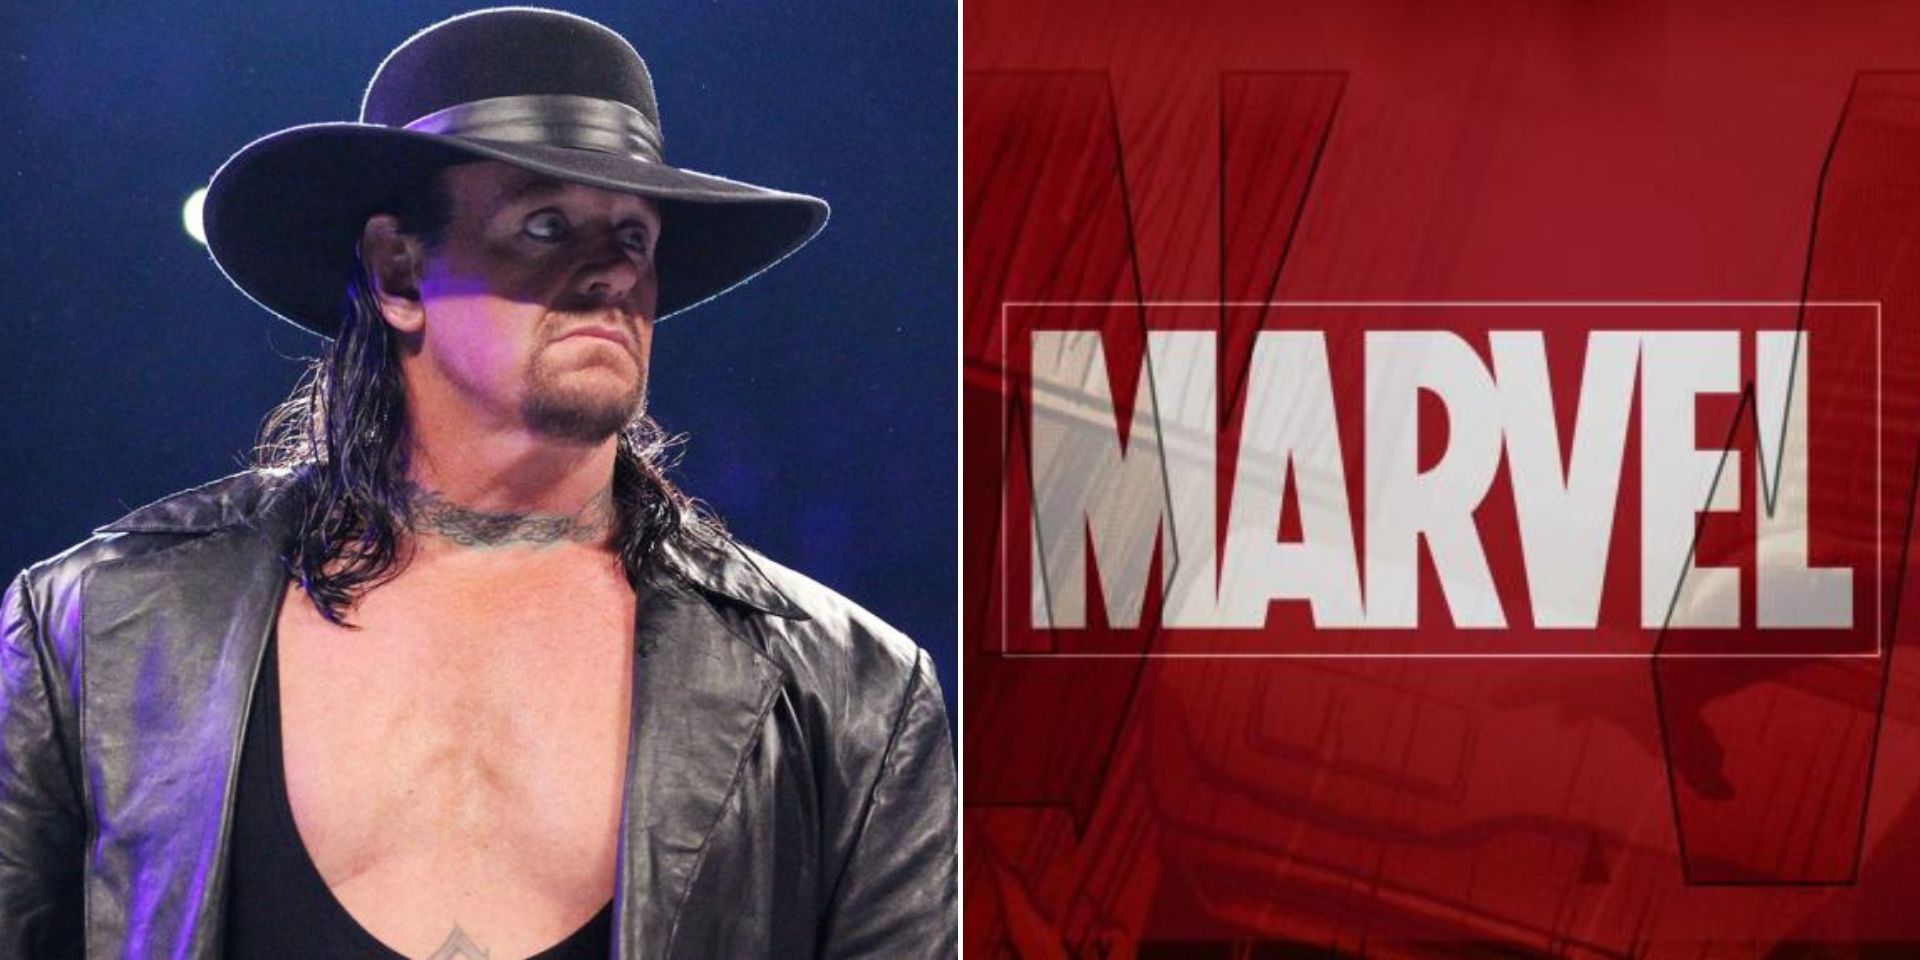 The Undertaker has been mentioned in a Marvel series